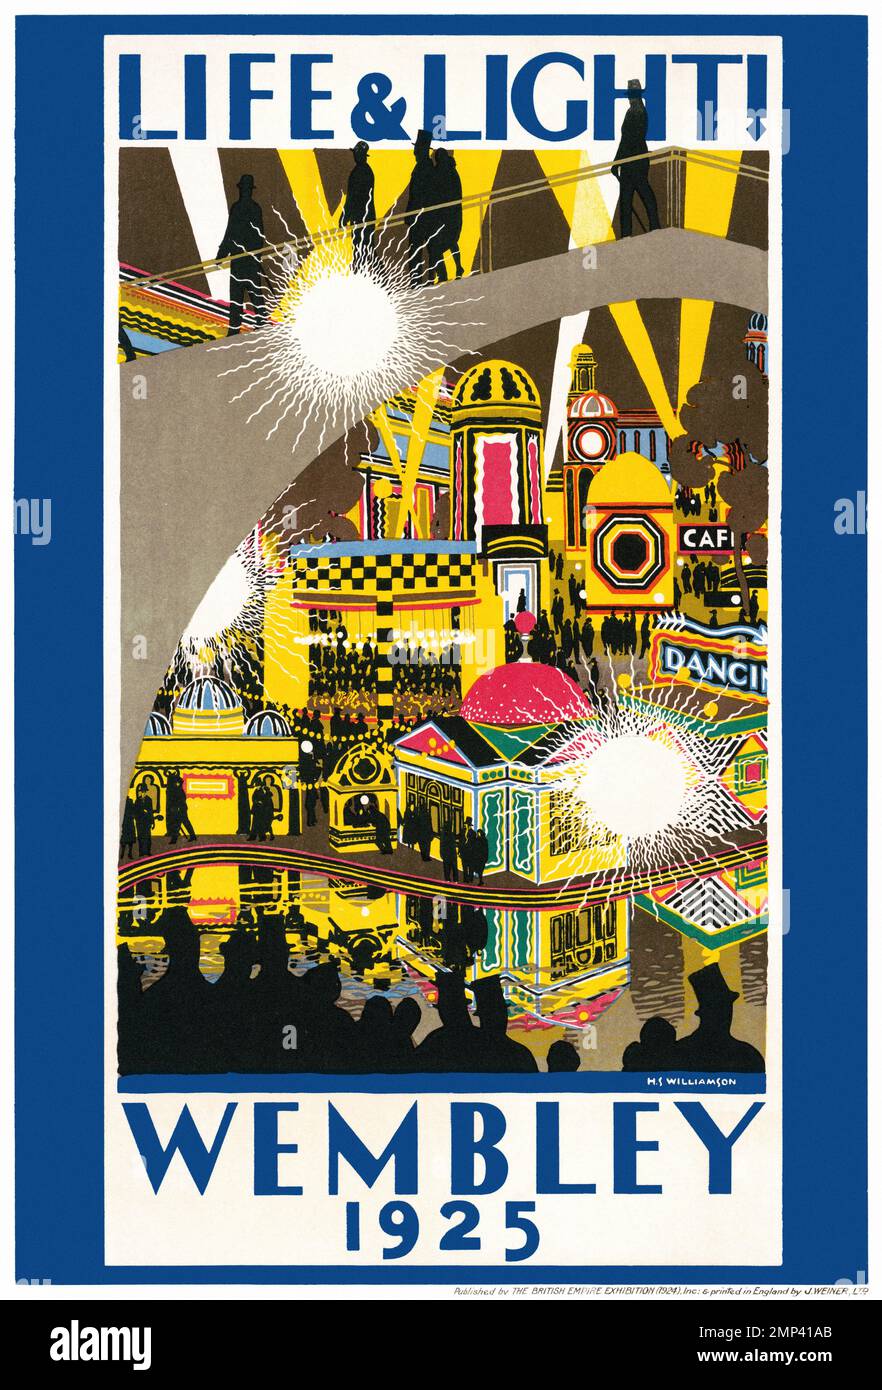 Life & light. Wembley 1925 by Harold Sandys Williamson (1882-1978). Published in the UK. Stock Photo